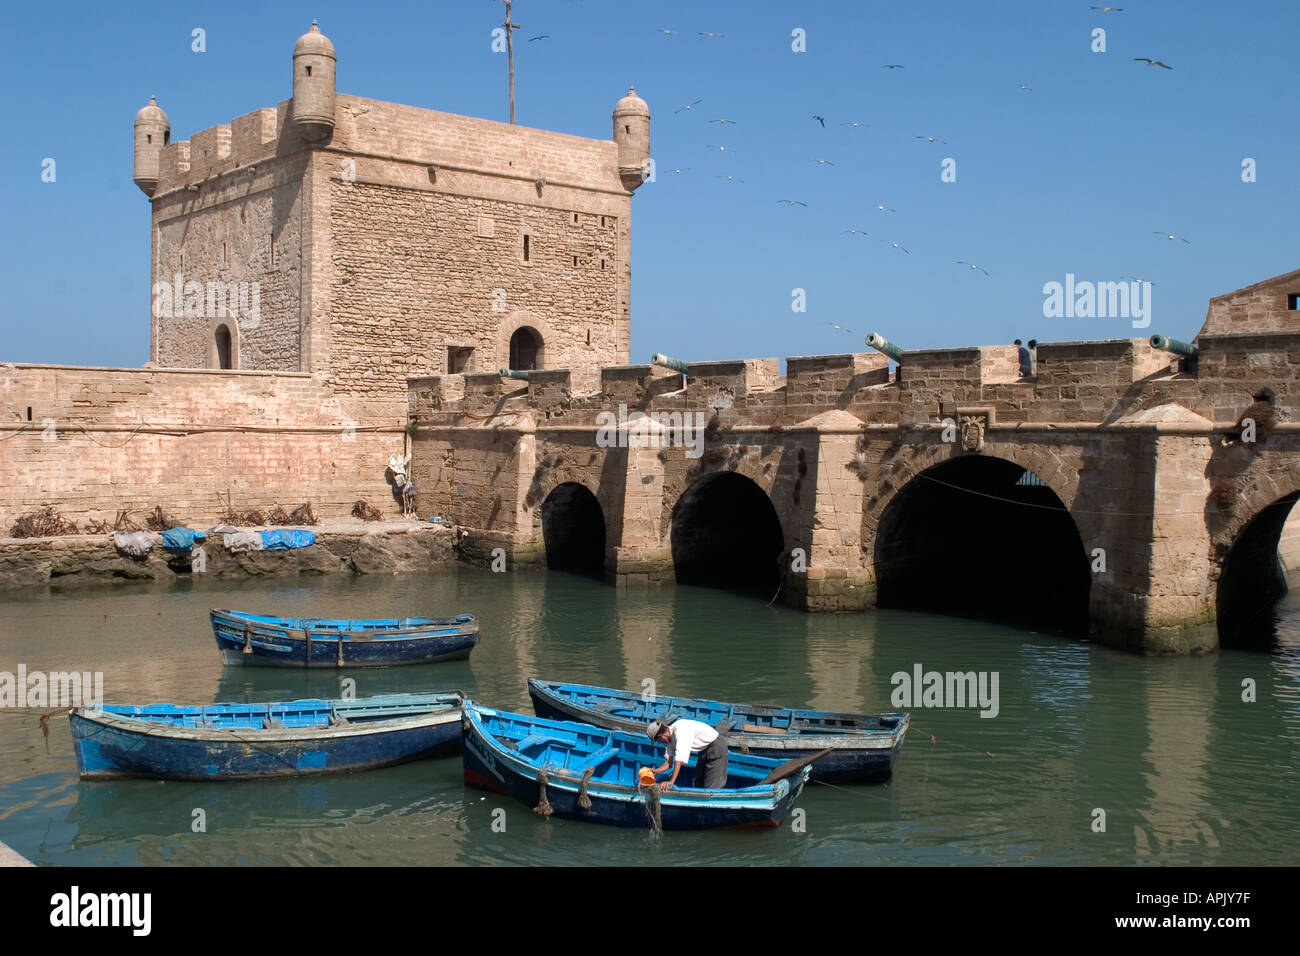 Four blue sardine boatsmoored beside the Skala or fort in essaouira seagulls are flying in the blue sky Stock Photo